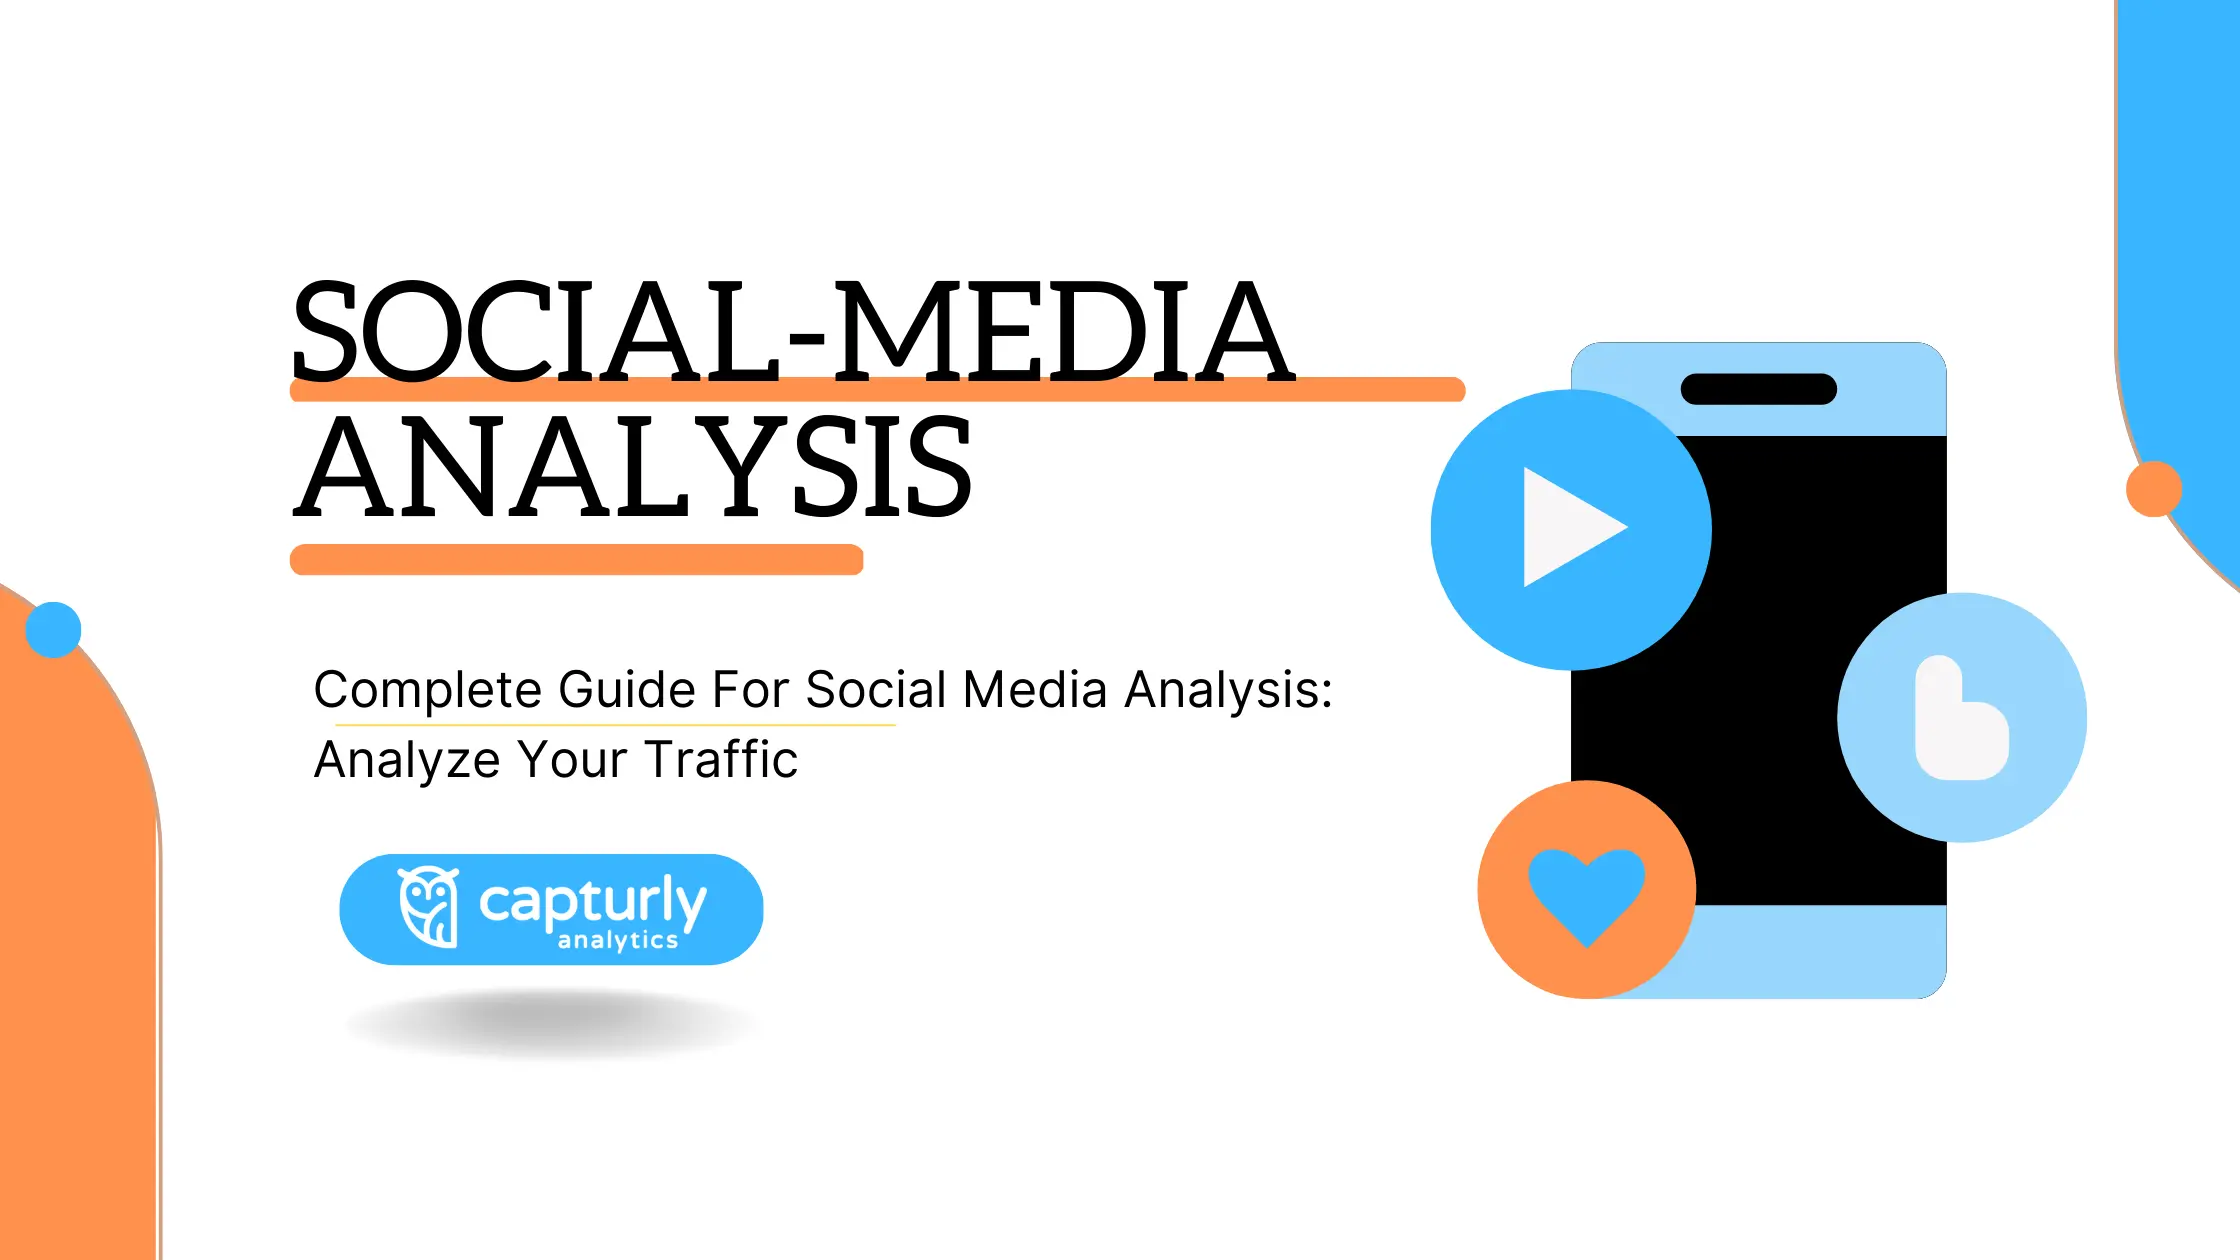 The image contains the title: Complete Guide For Social Media Analysis: Analyze Your Traffic and also a pictogram of a phone.